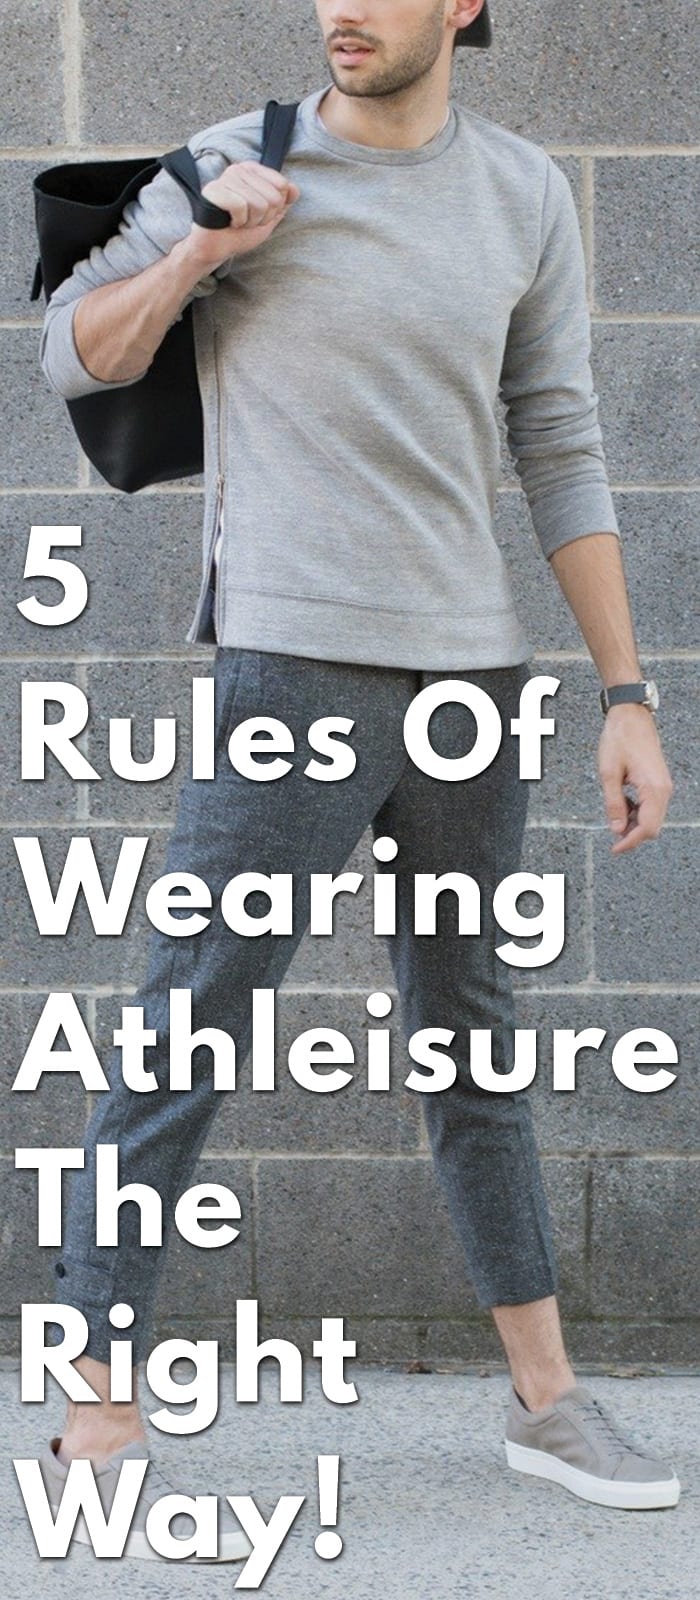 5-Rules-Of-Wearing-Athleisure-The-Right-Way!